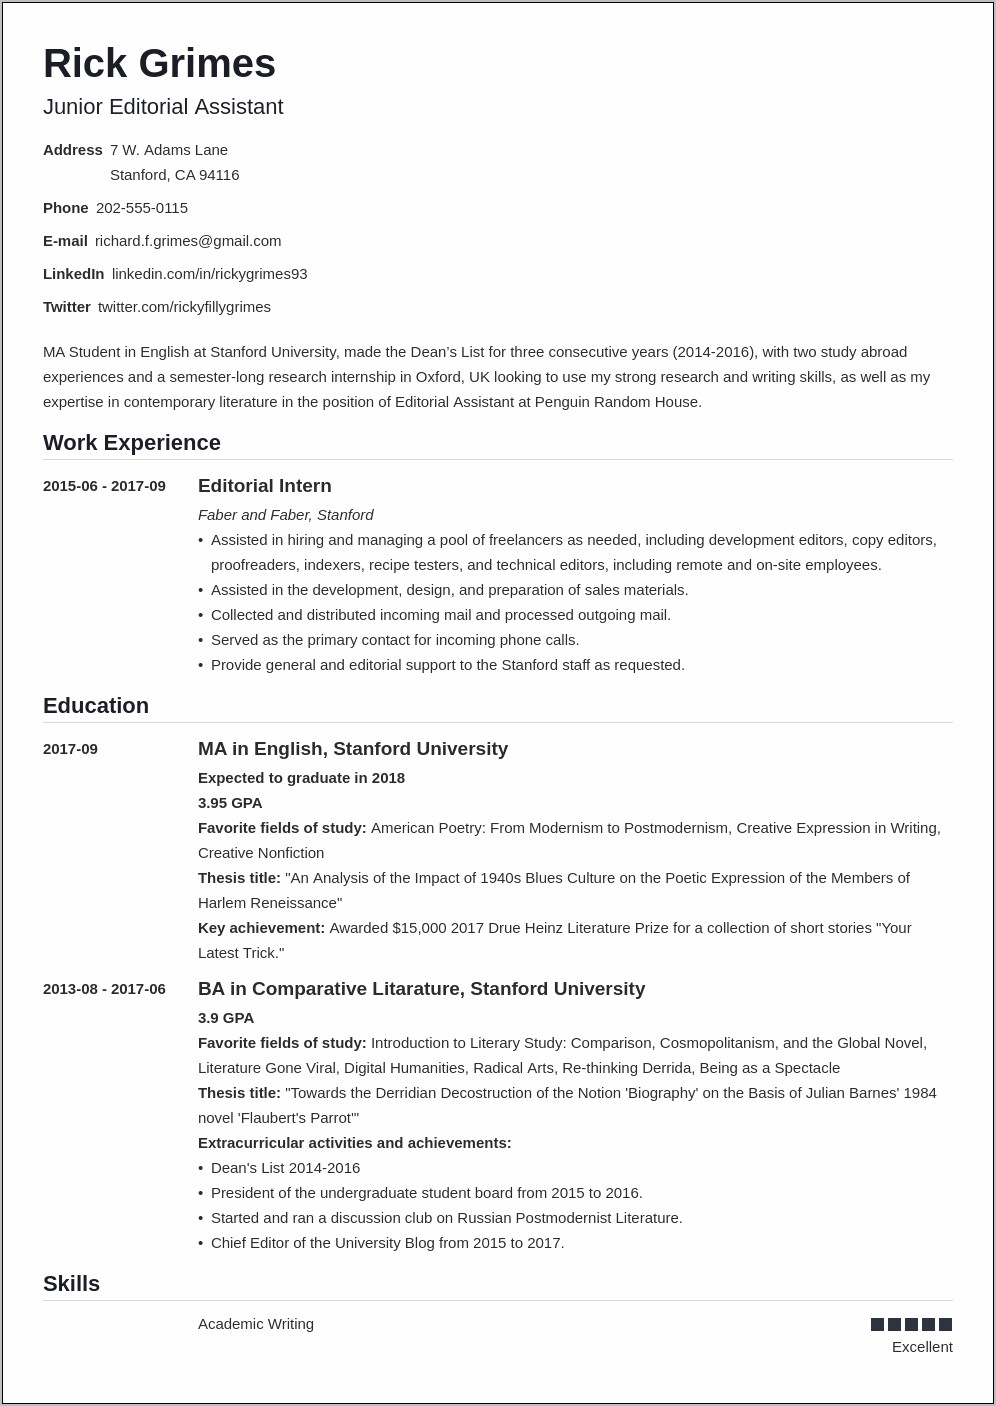 Summary Section Of Resume Sample